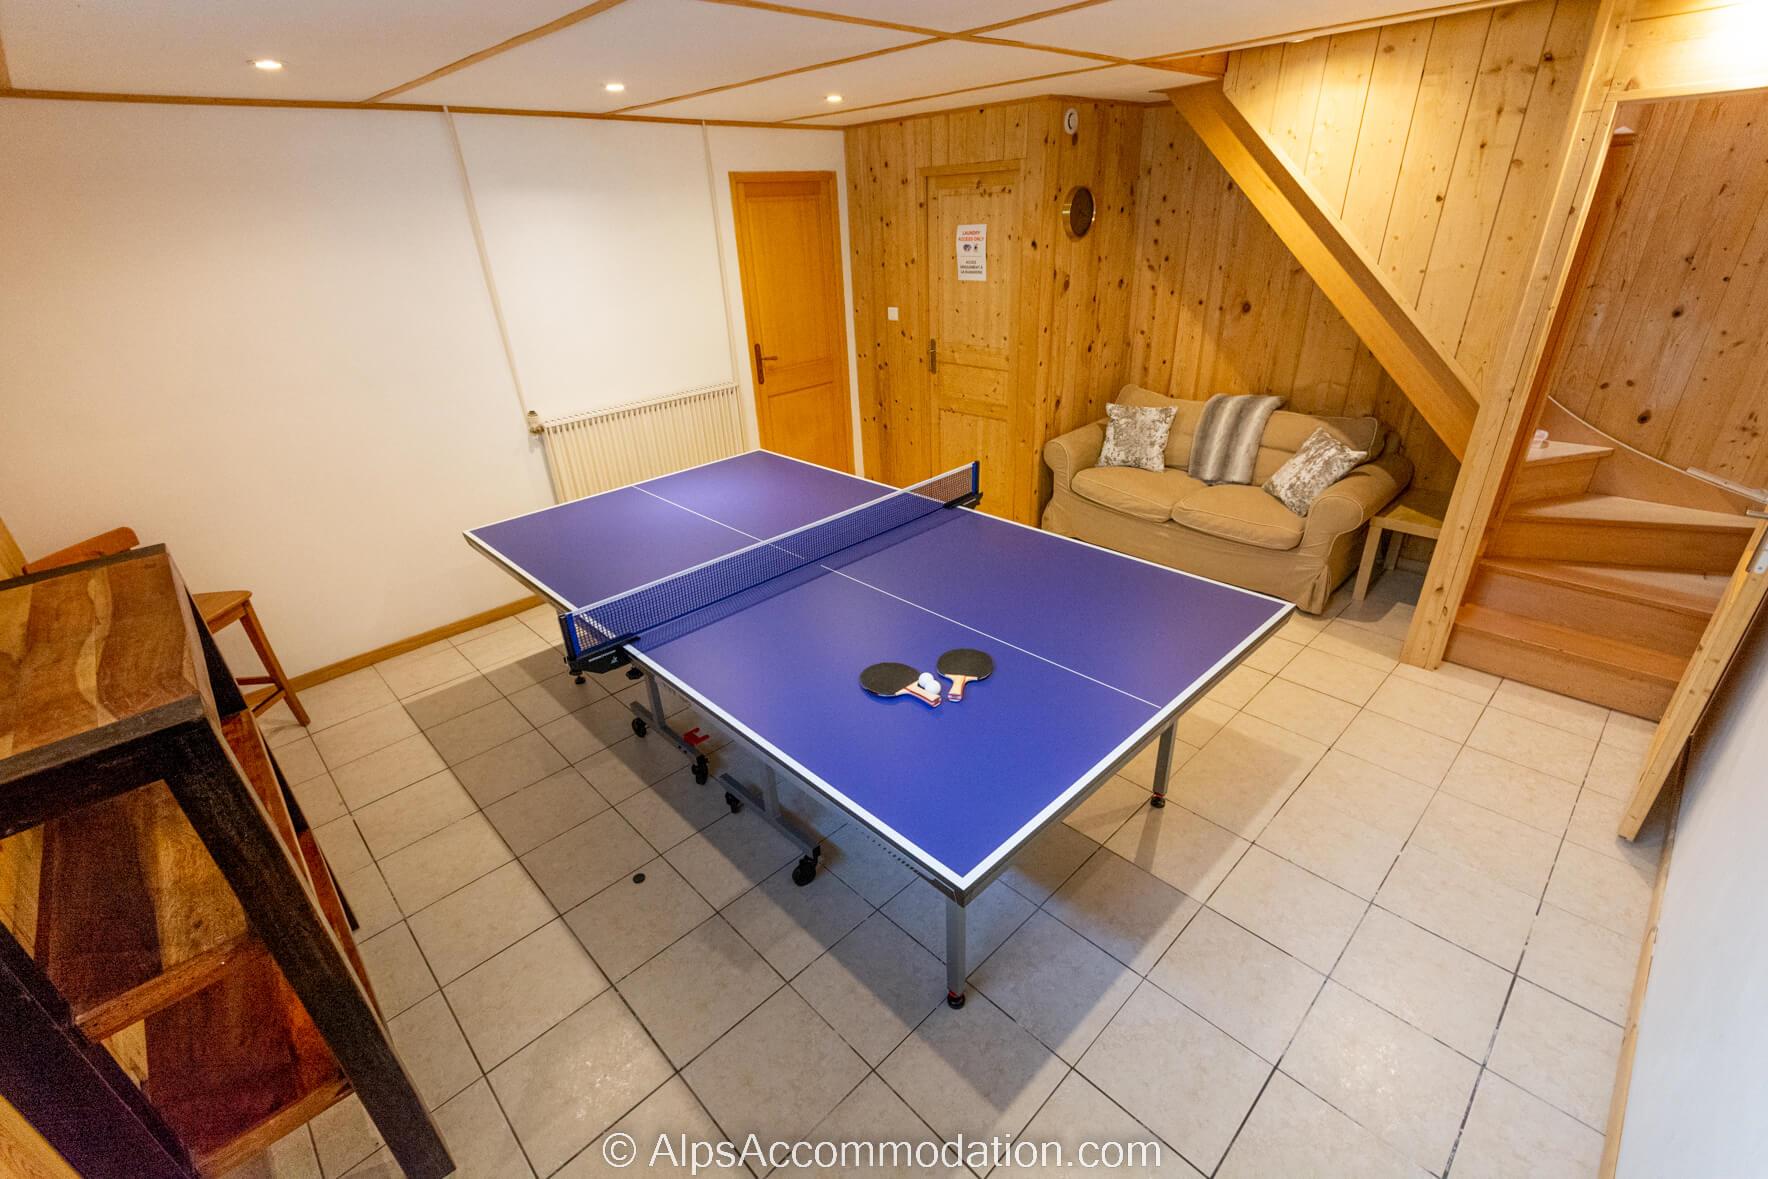 Chalet Taylor Morillon - Games room with table tennis